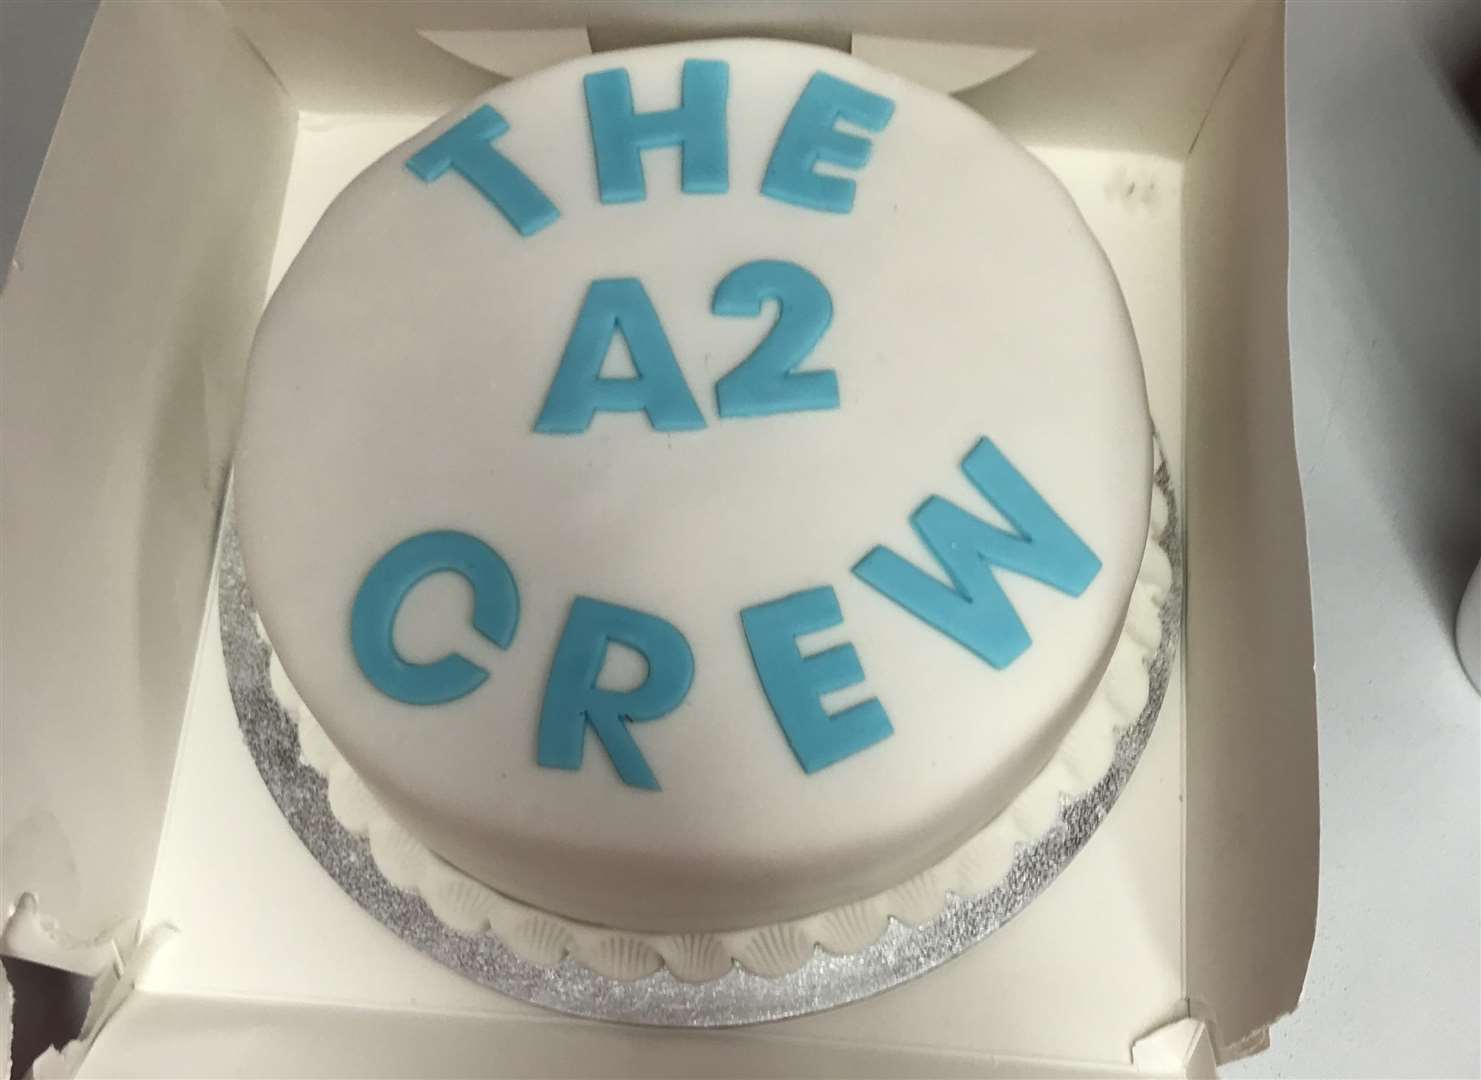 The crew's help was appreciated with a cake